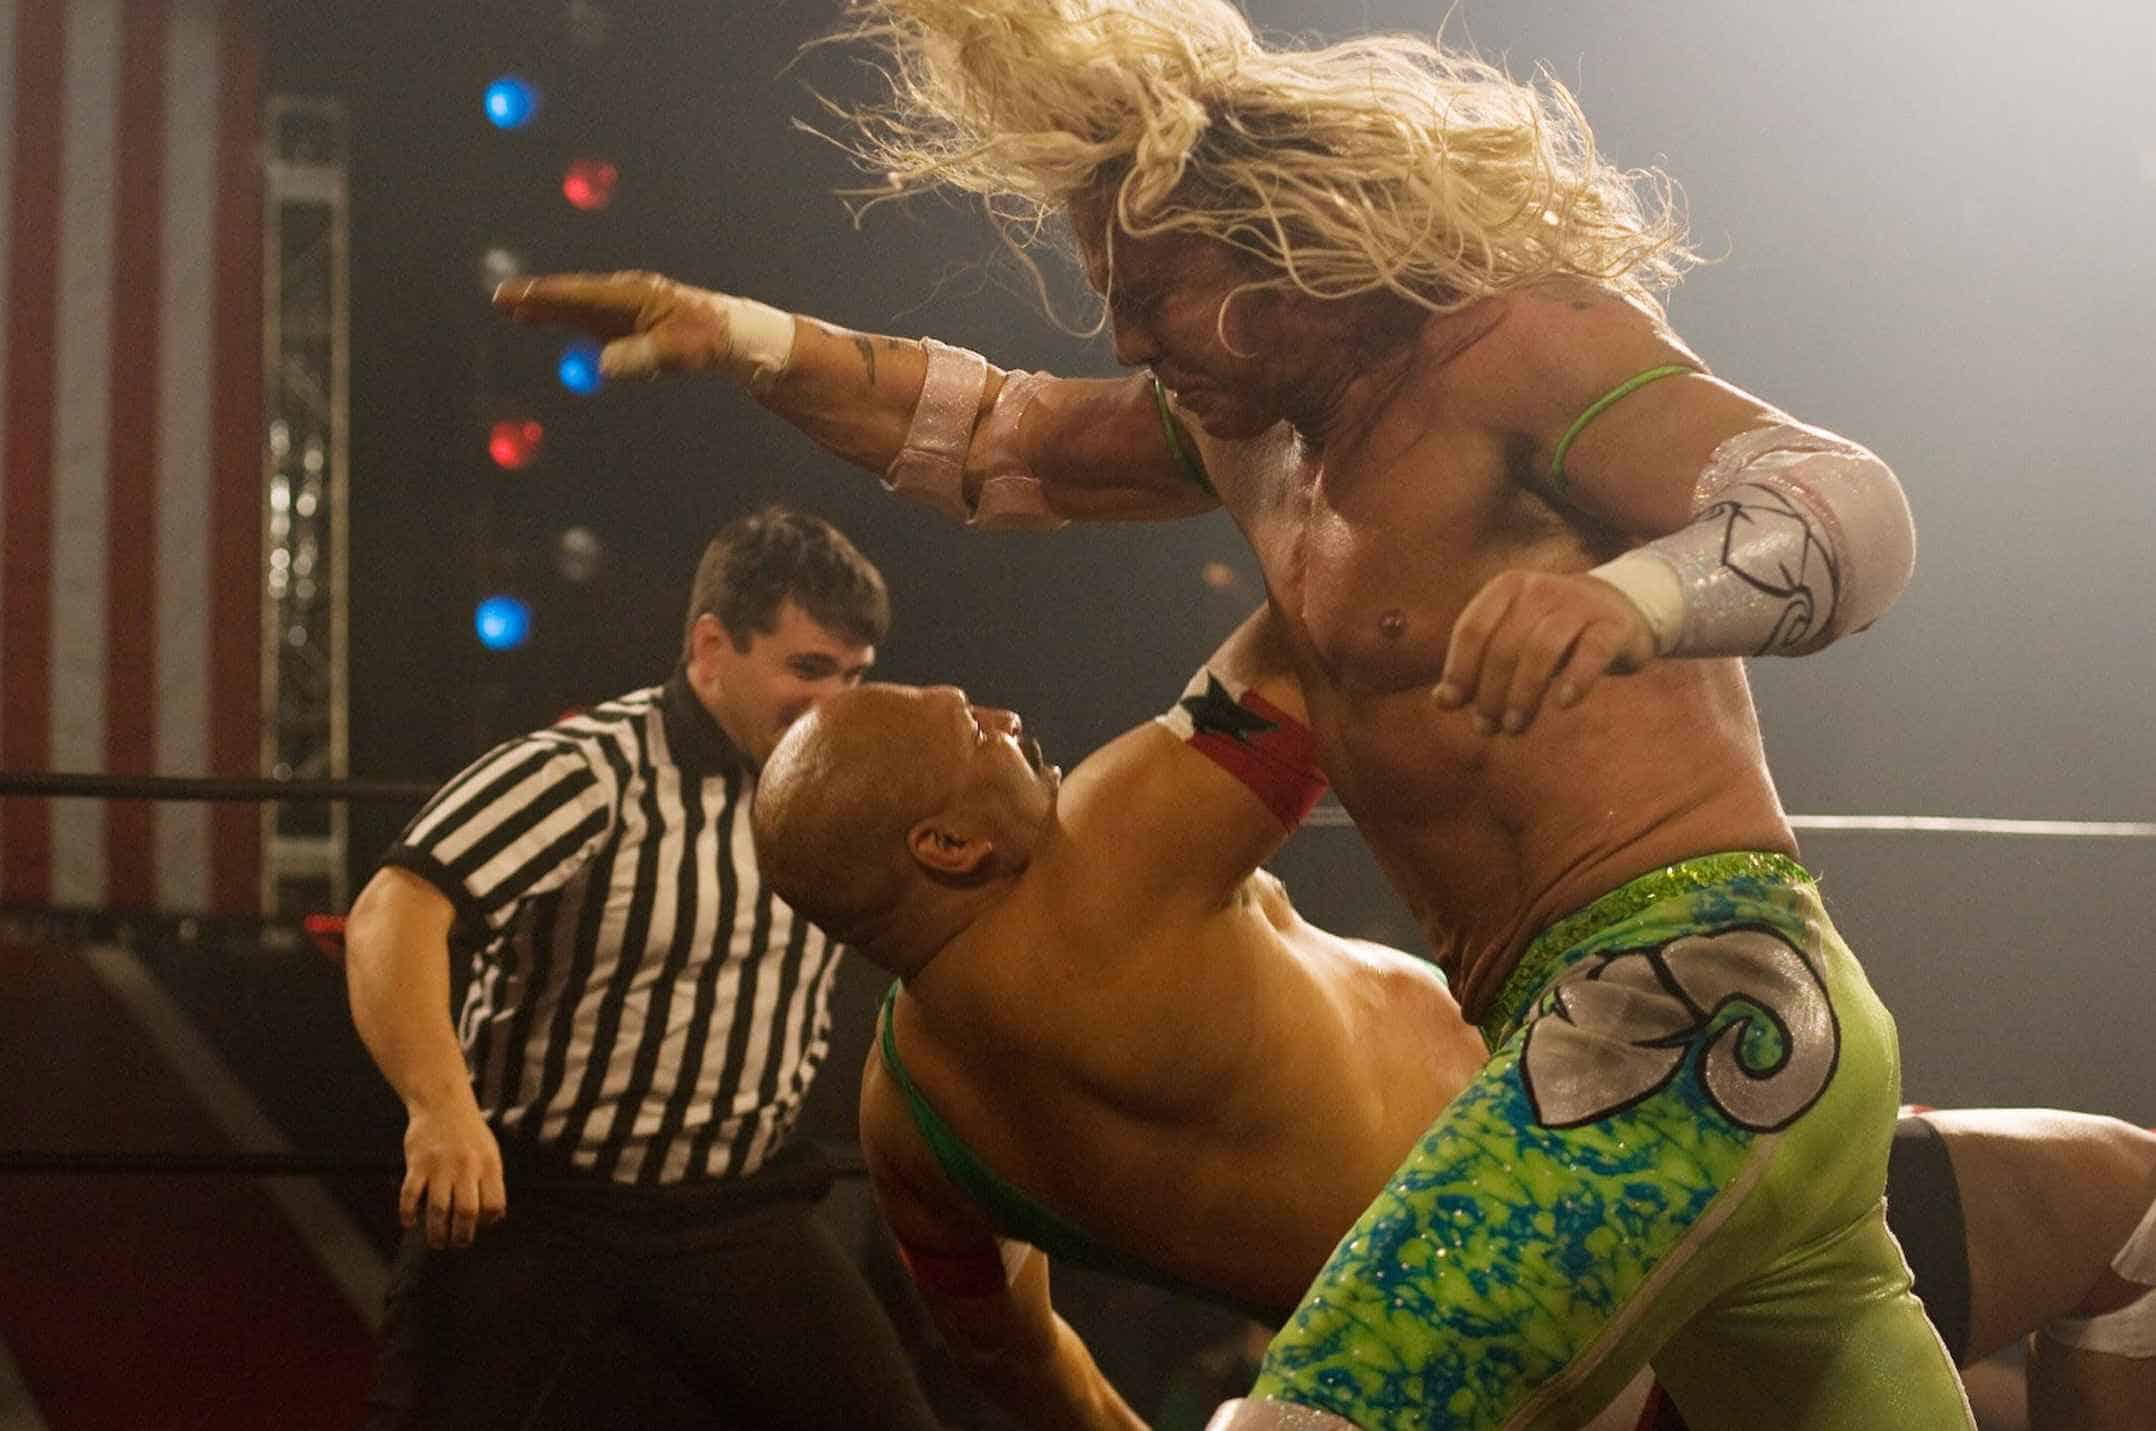 Best Wrestling Movies to Watch This Weekend